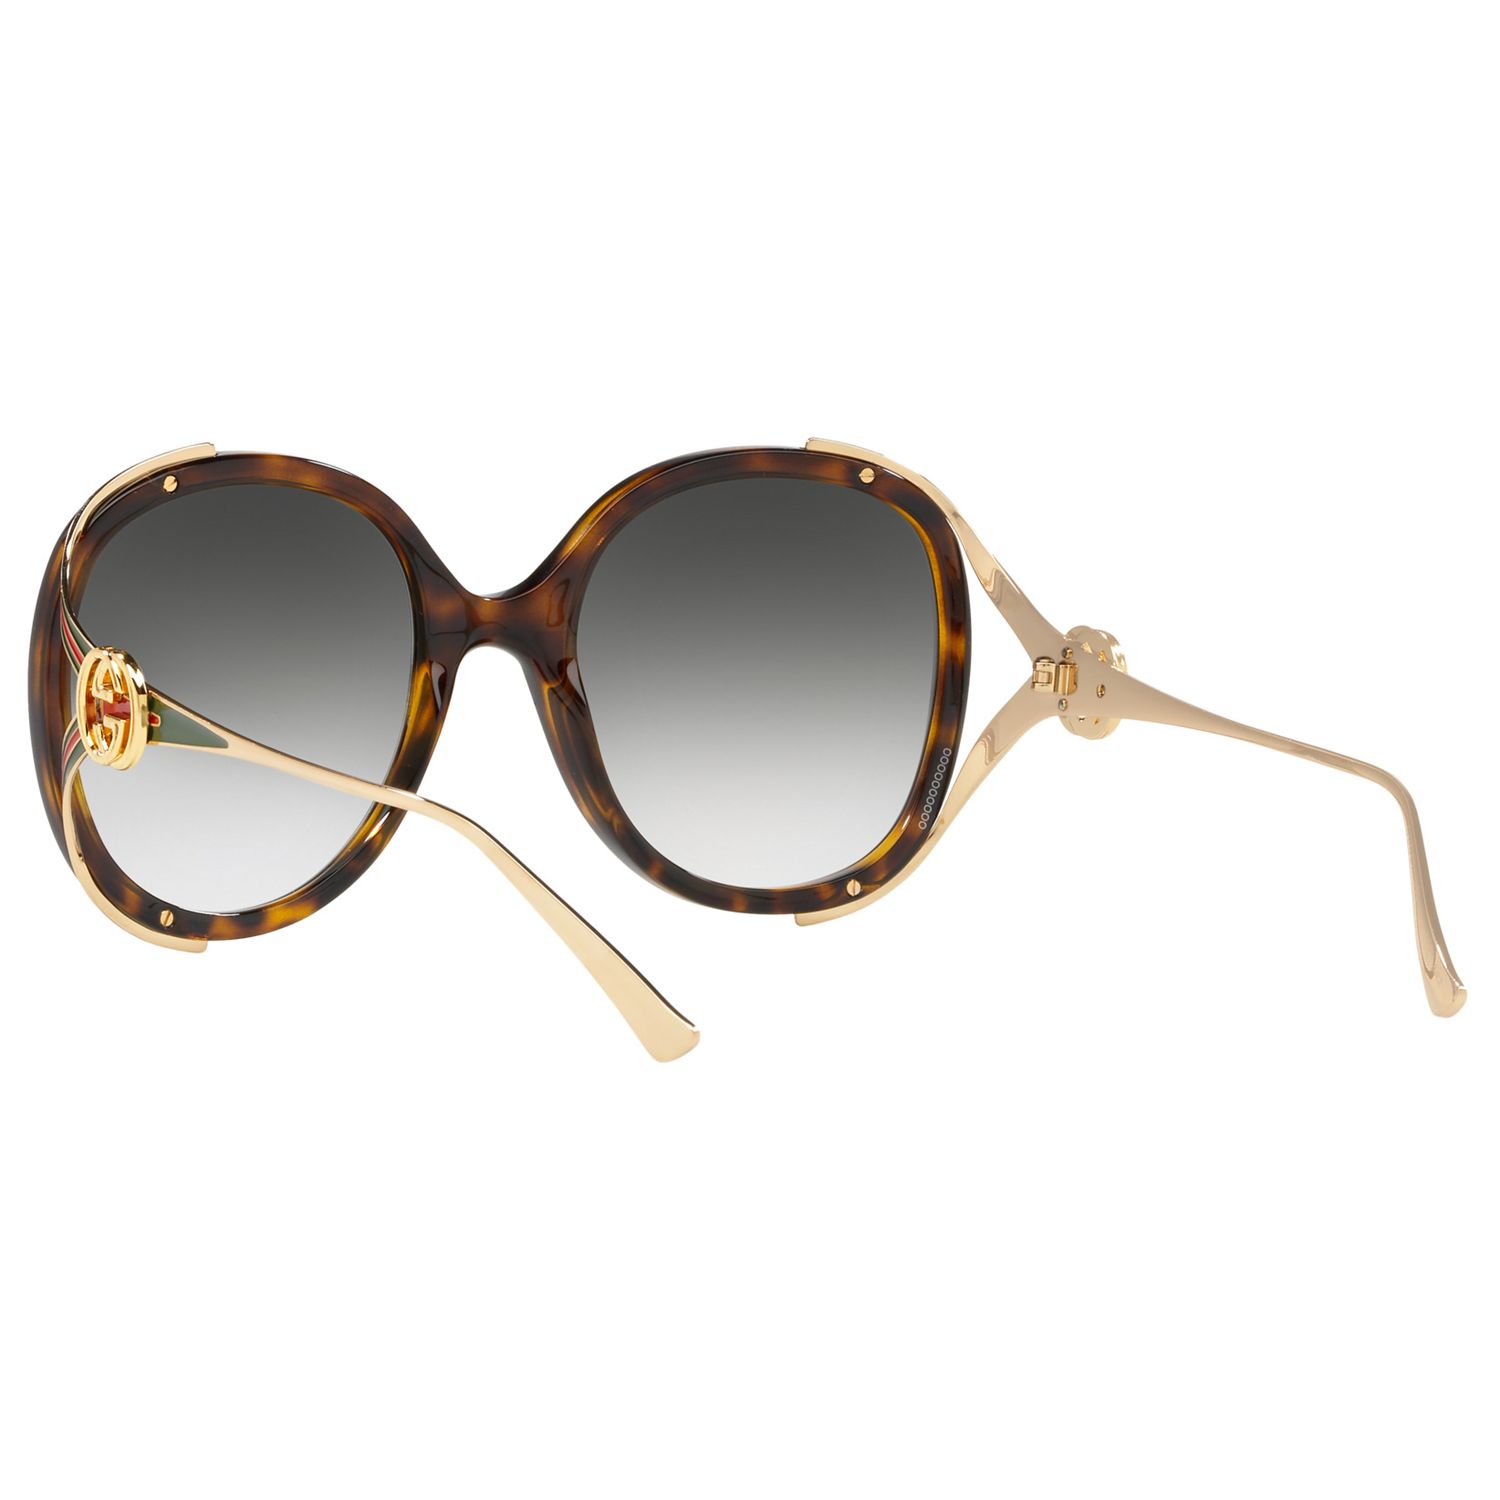 Gucci GG0226S Women's Statement Oval Sunglasses at John Lewis & Partners